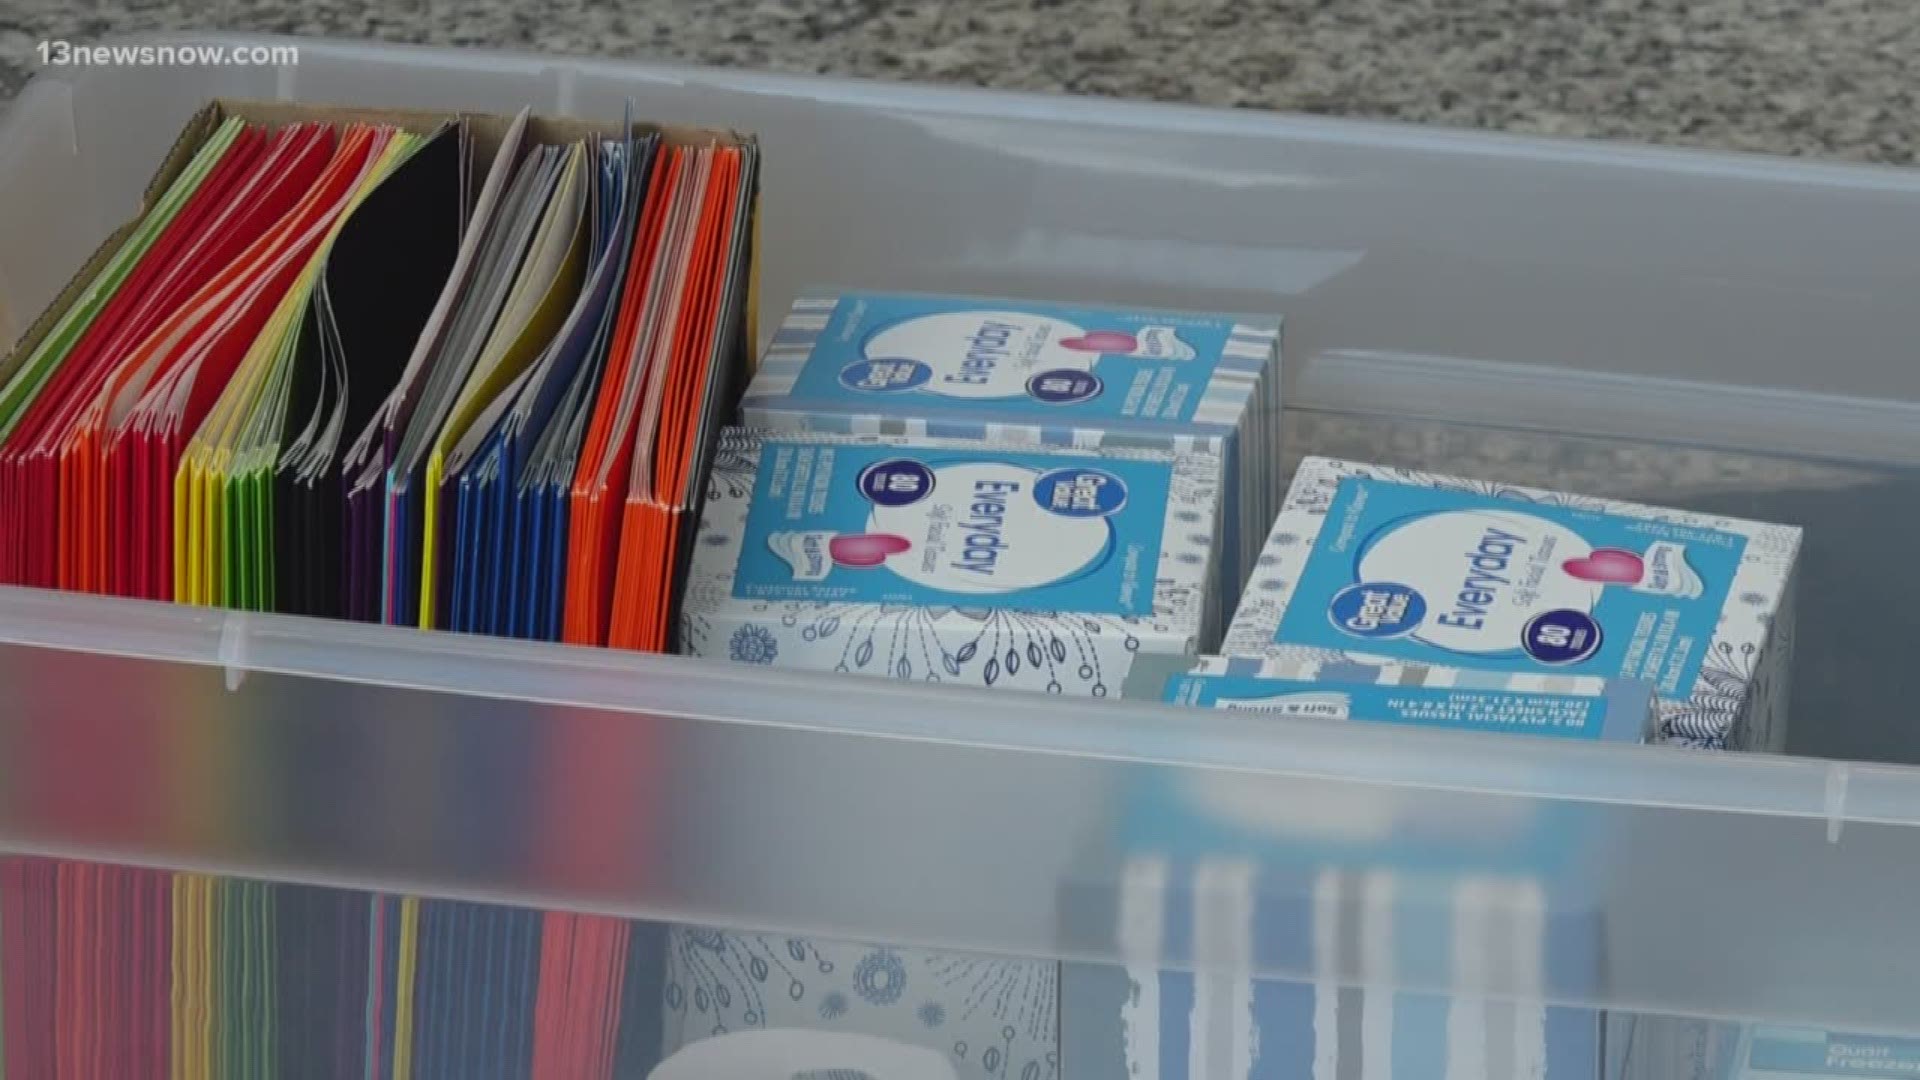 School supplies tend to run short midway through the year, so one local business owner is donating school supplies to help two teachers support their students.